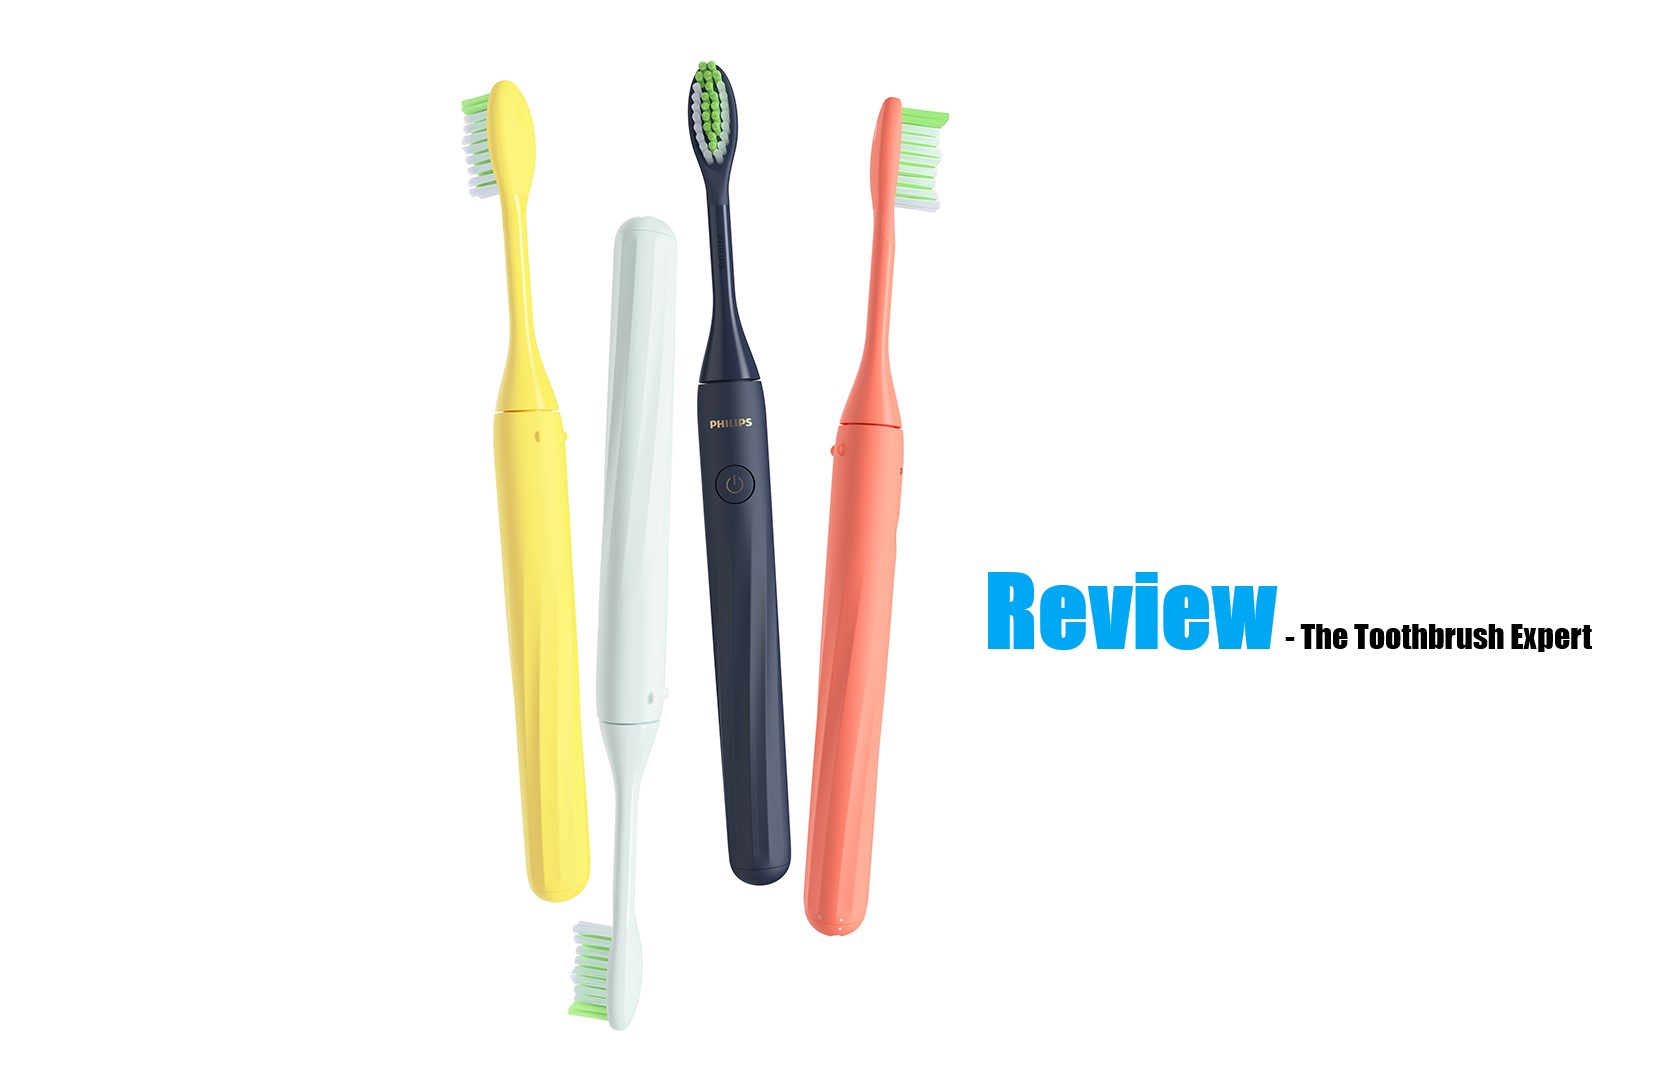 Philips Sonicare One review - the toothbrush expert